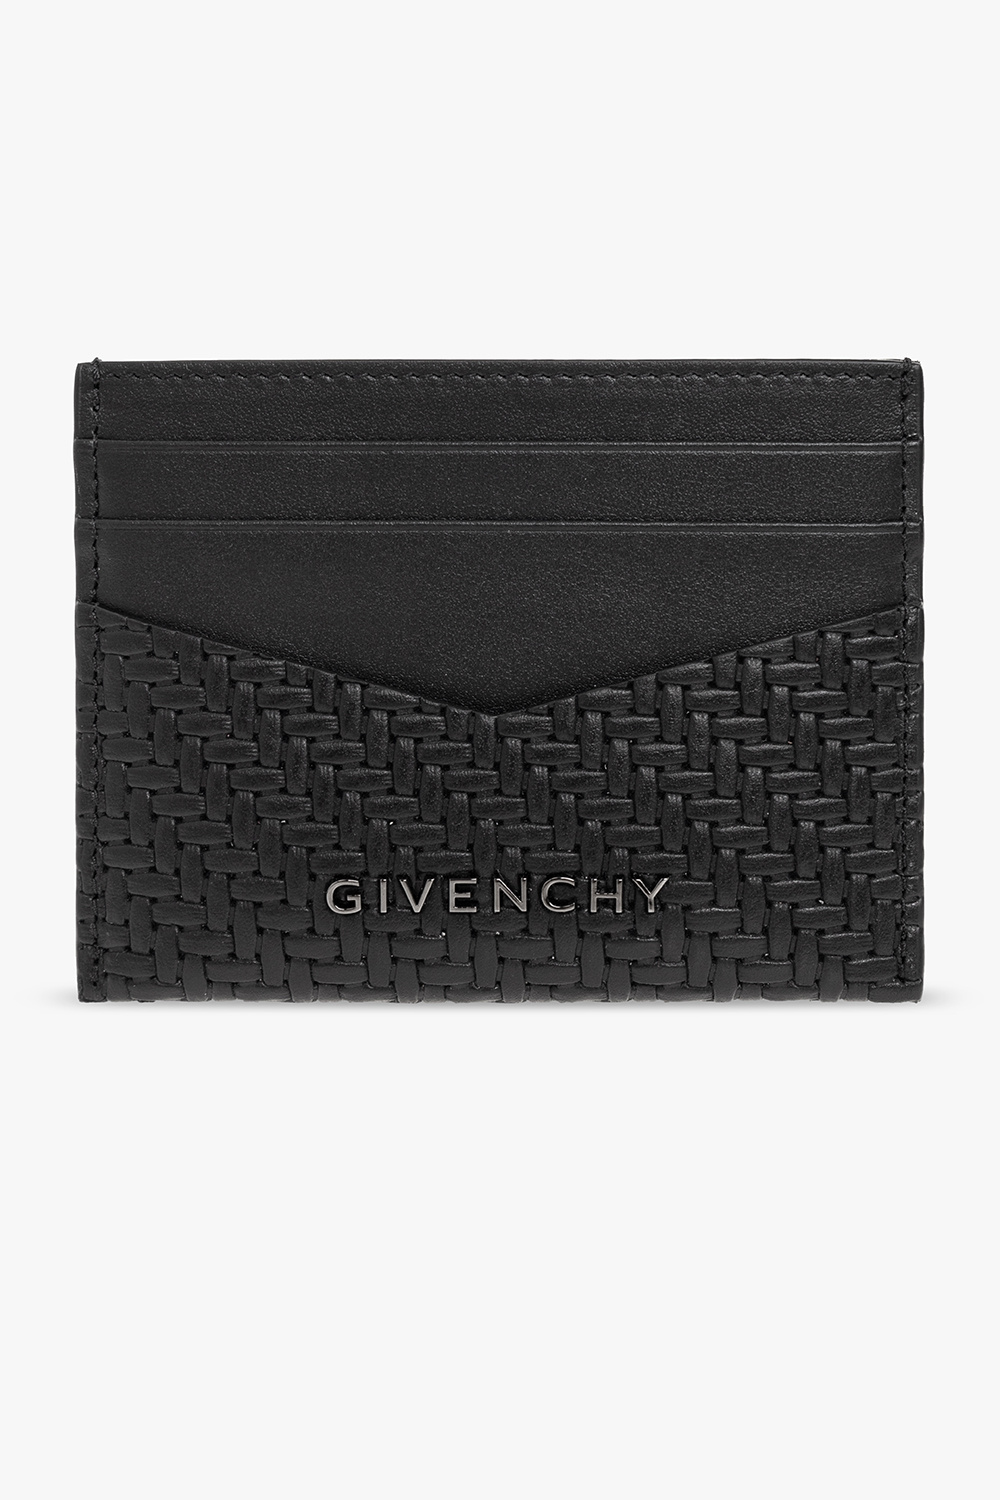 Givenchy Card glasses